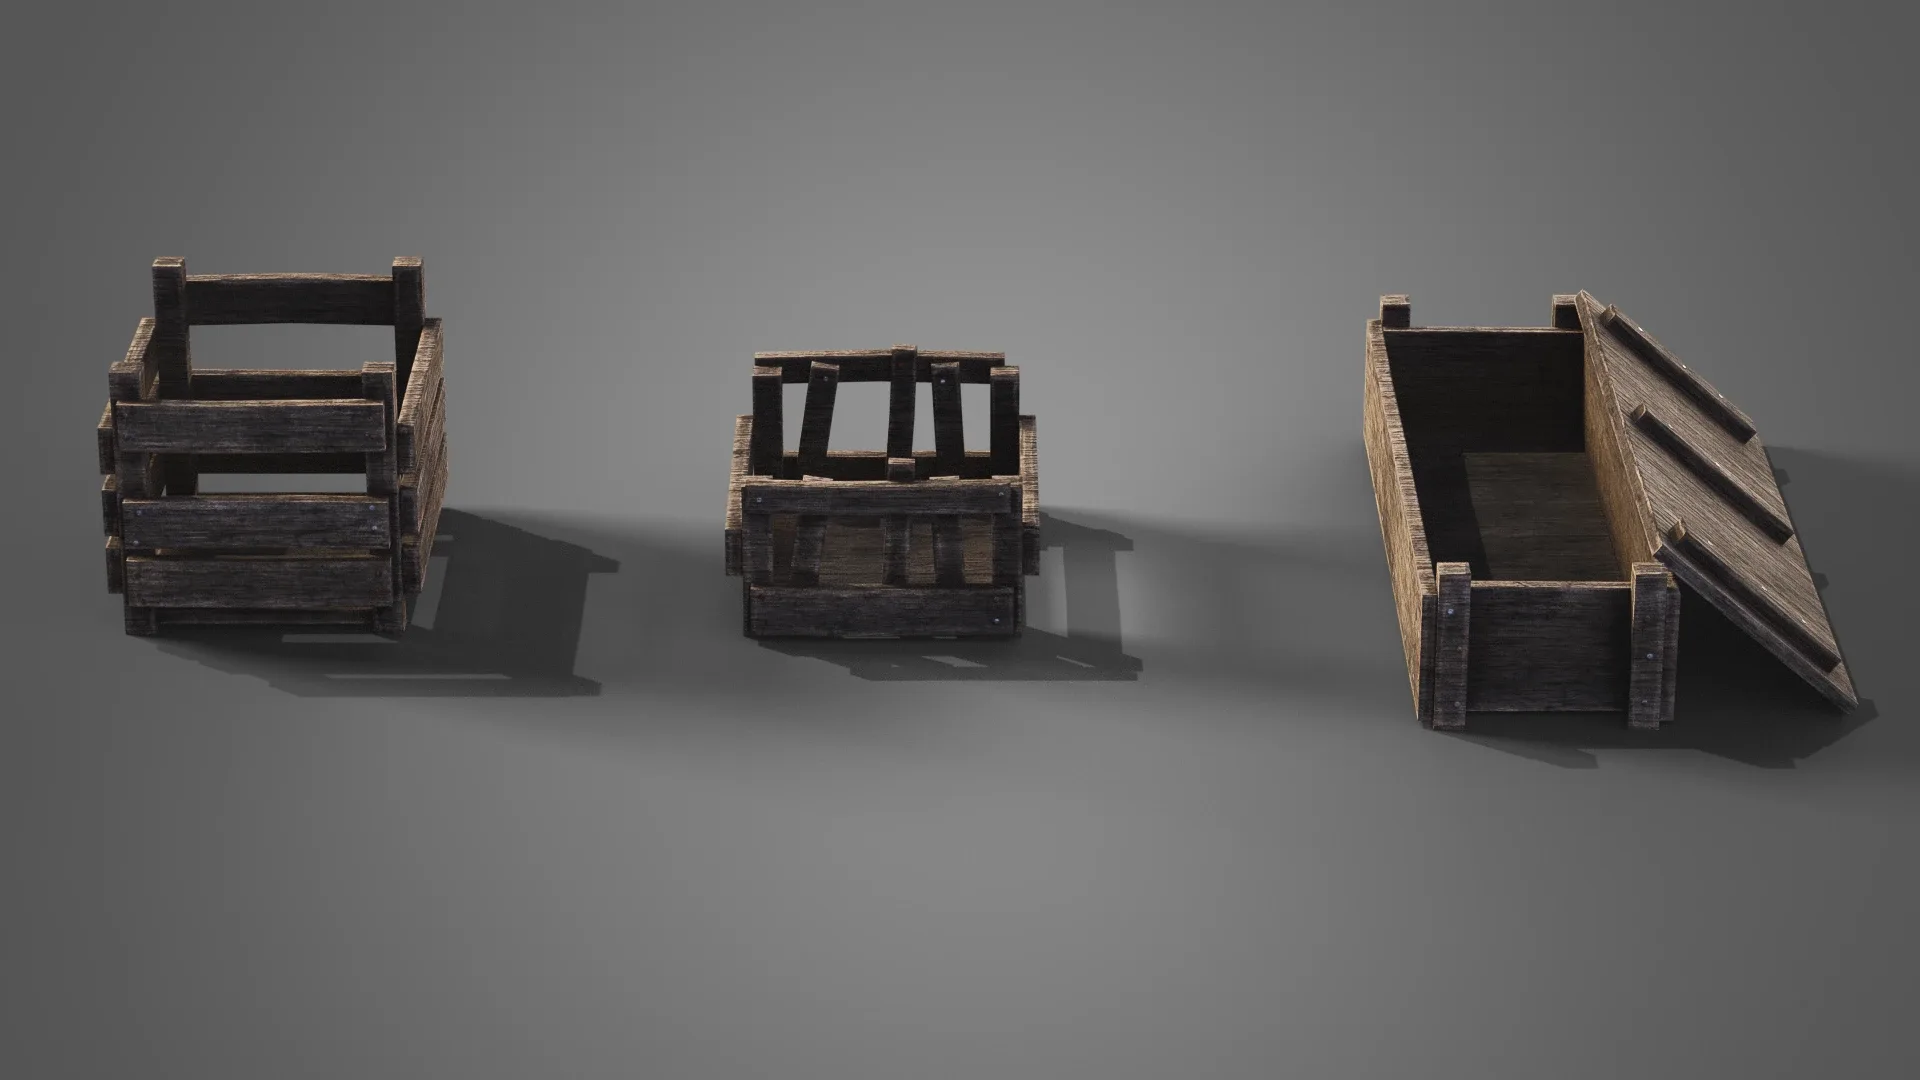 Medieval boxes